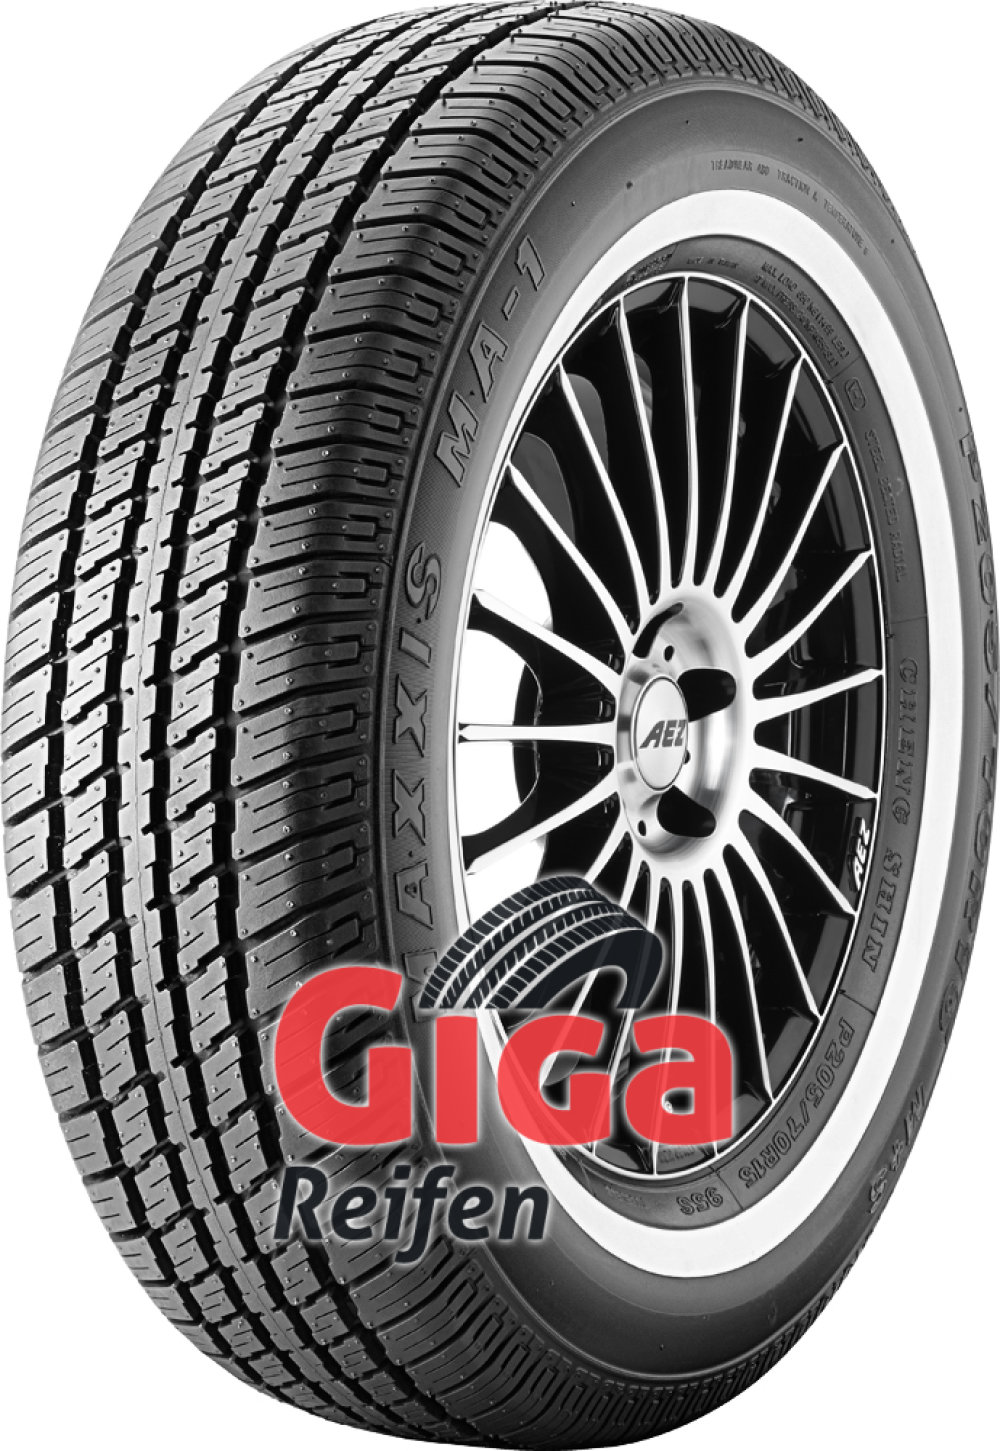 Maxxis MA 1 ( 205/70 R15 95S WSW 20mm ) von Maxxis